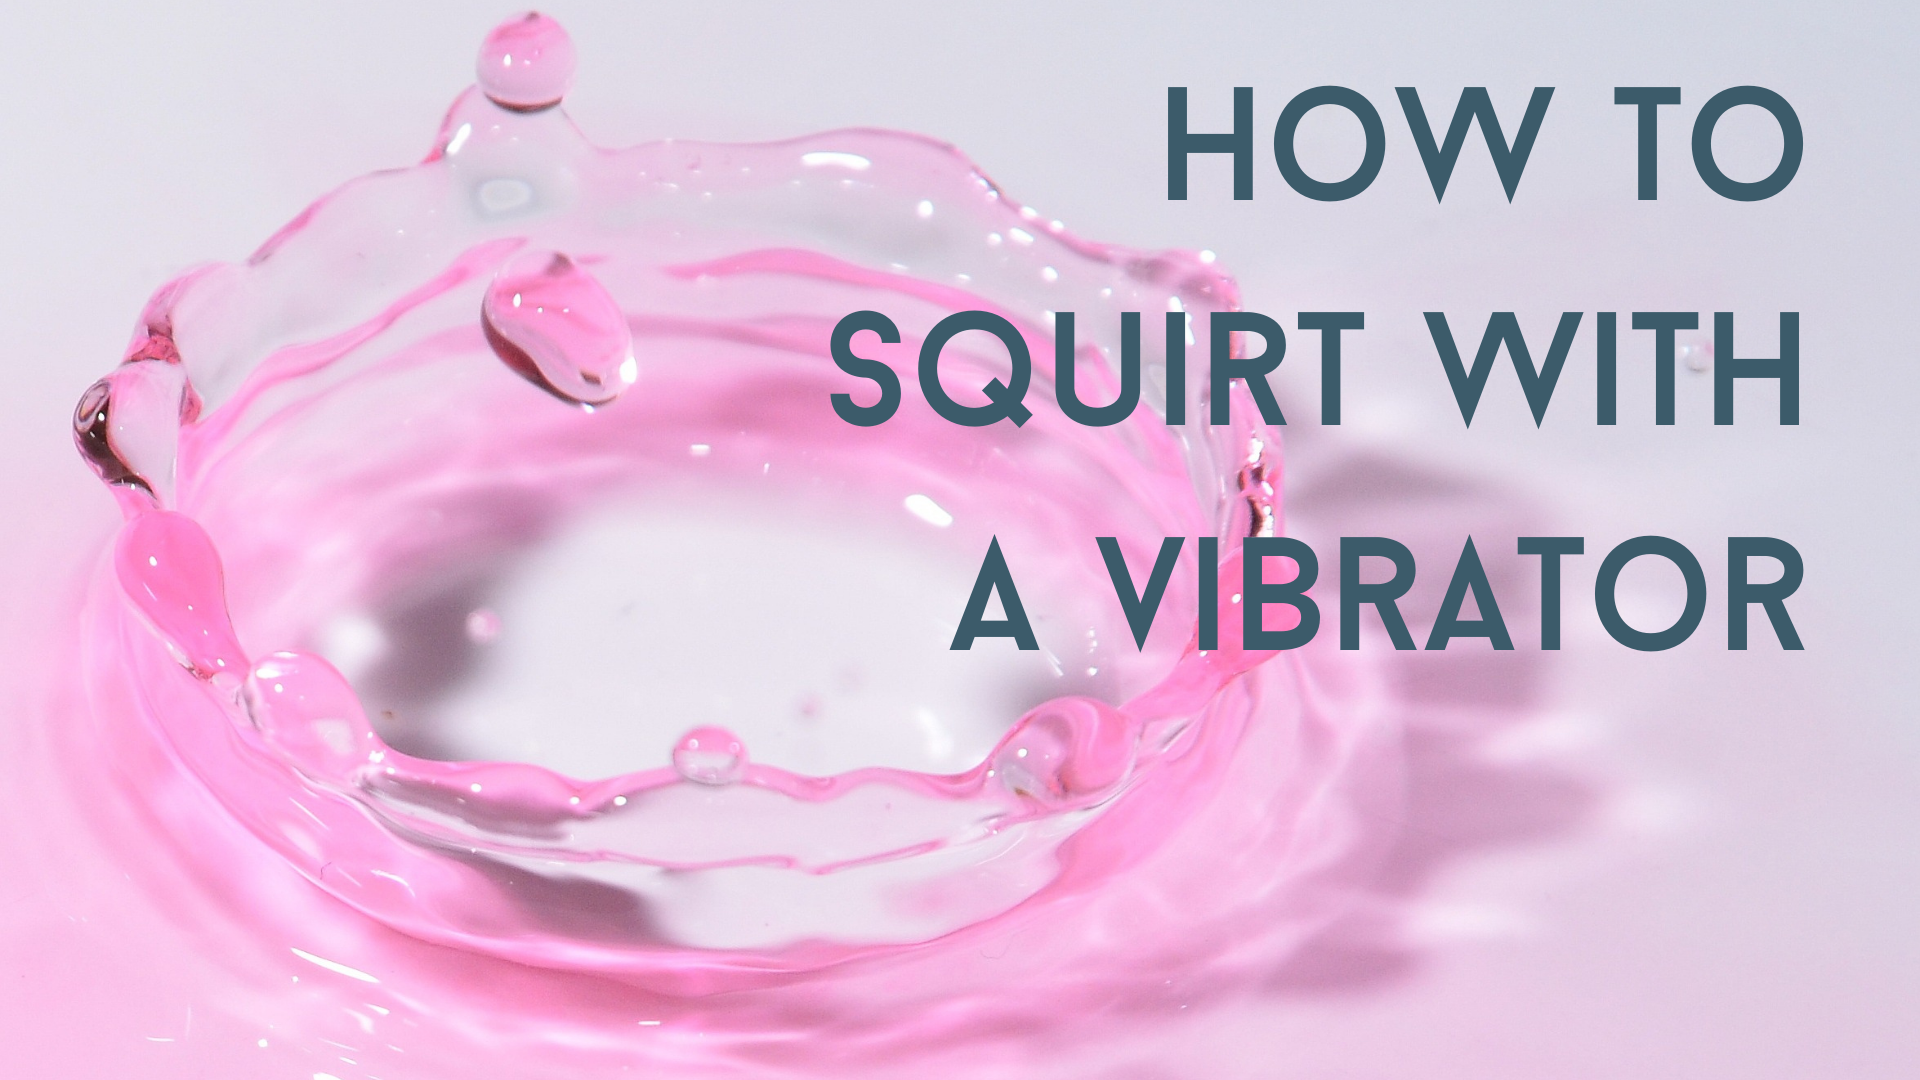 How to Squirt With a Vibrator (Or Have a Really Great Orgasm)